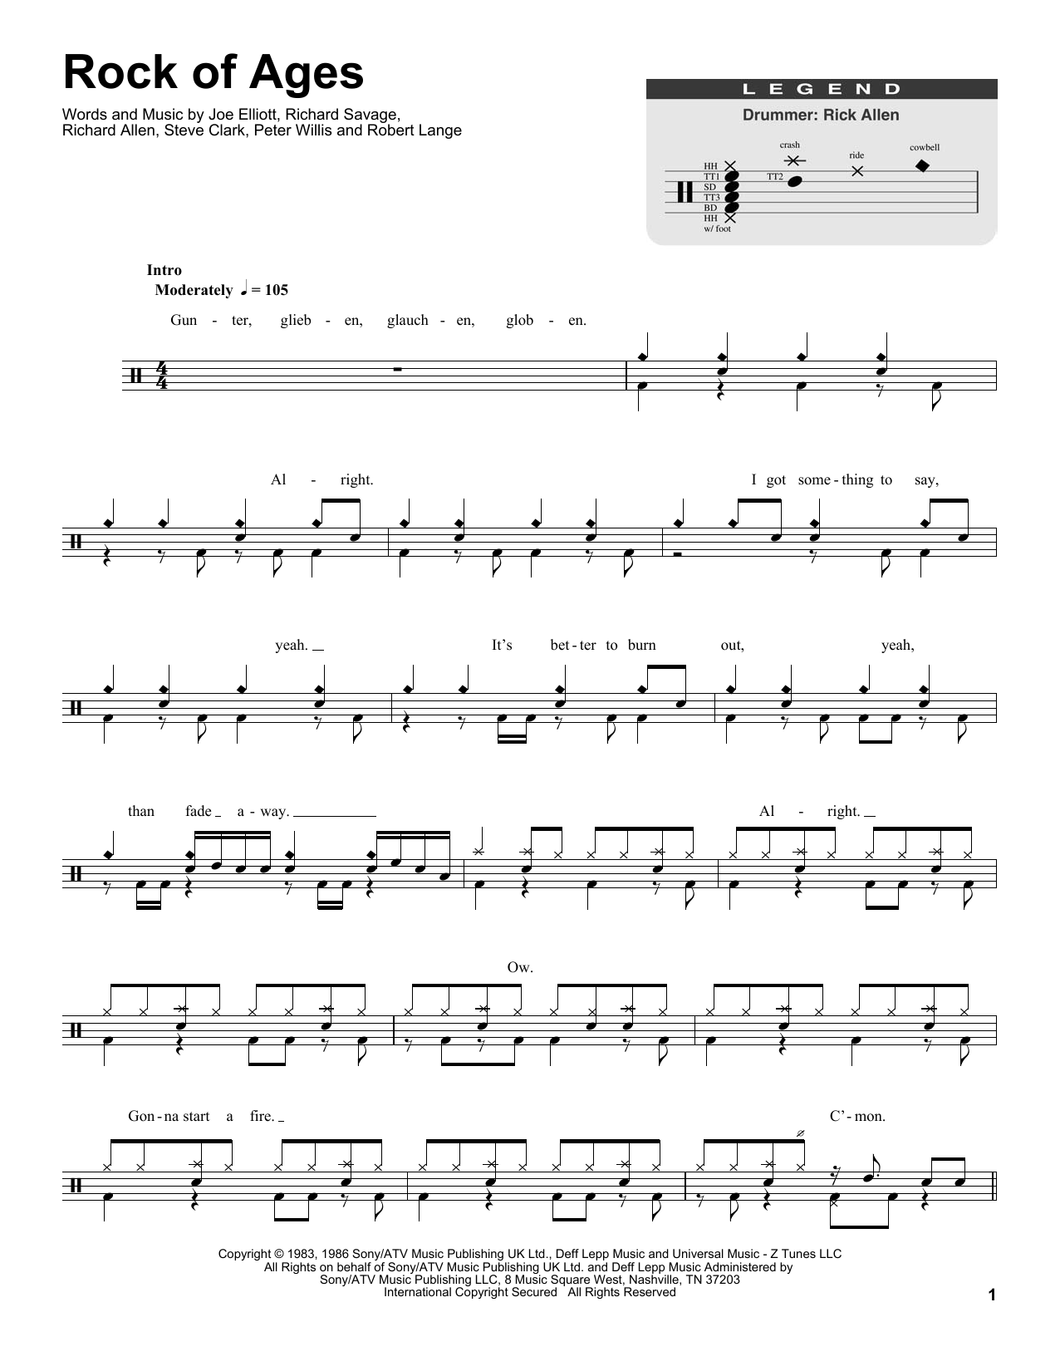 Rock of Ages - Def Leppard - Full Drum Transcription / Drum Sheet Music - SheetMusicDirect DT